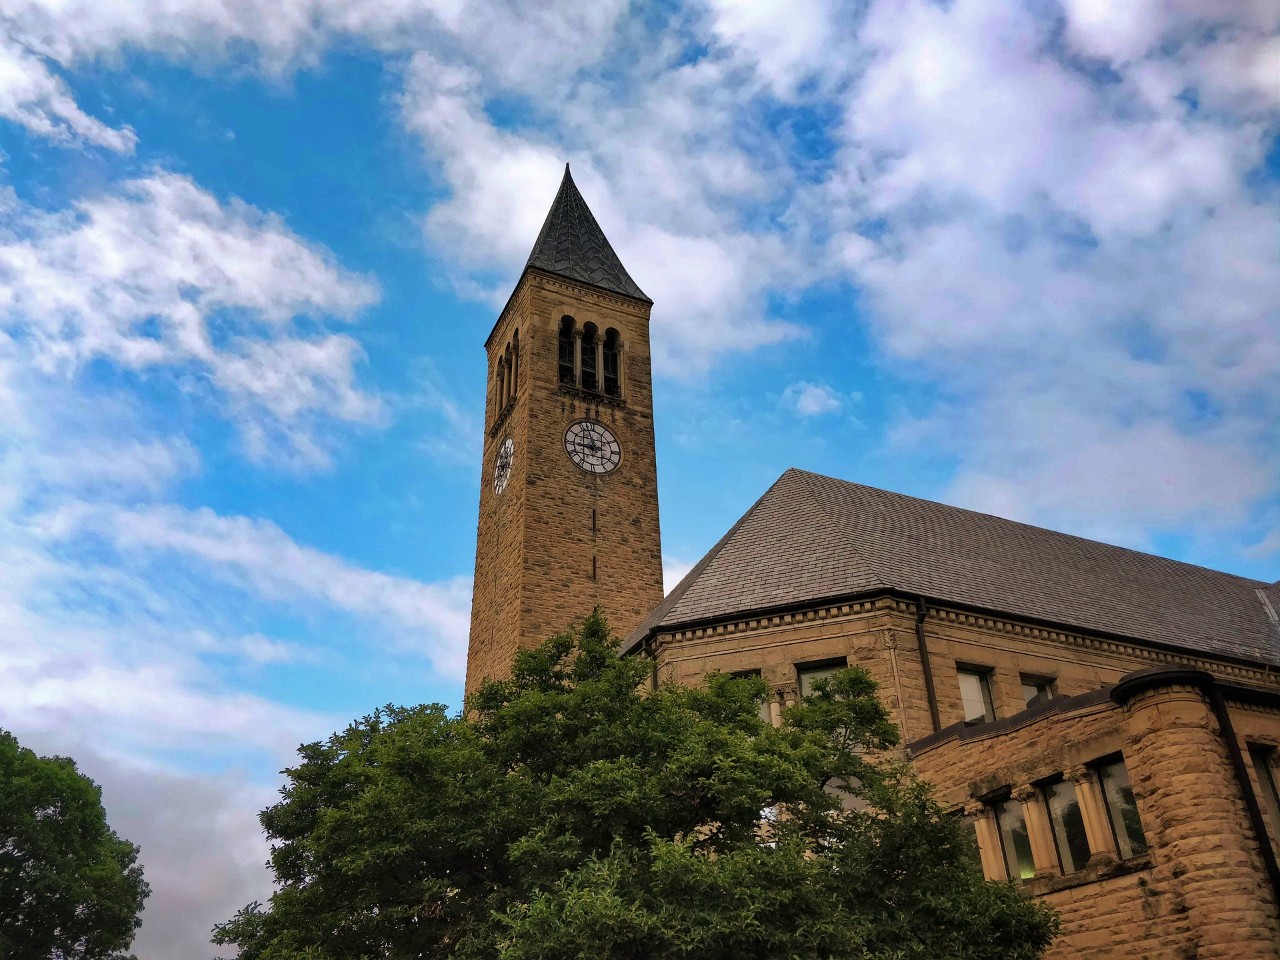 The Cornell University Bell Tower